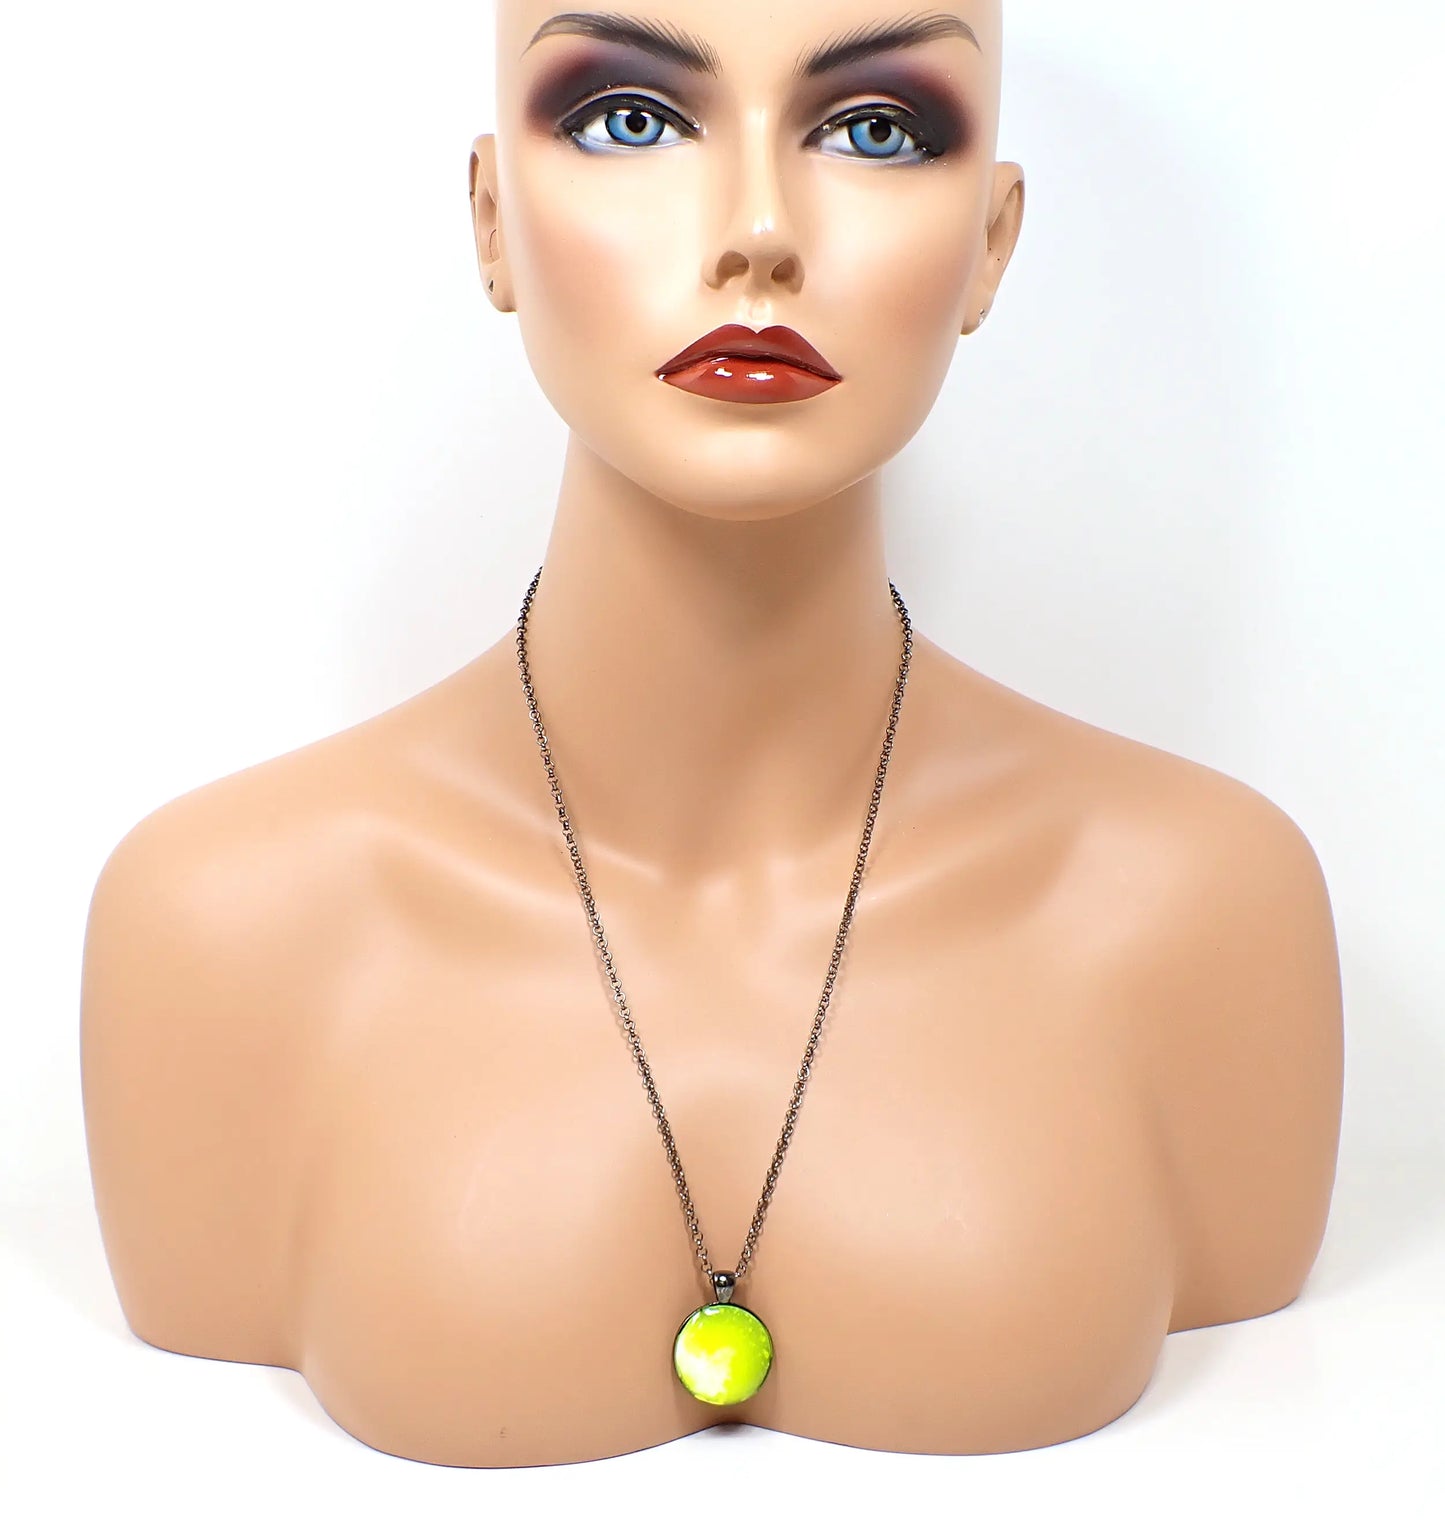 Handmade White and Neon Yellow Resin Pendant Necklace